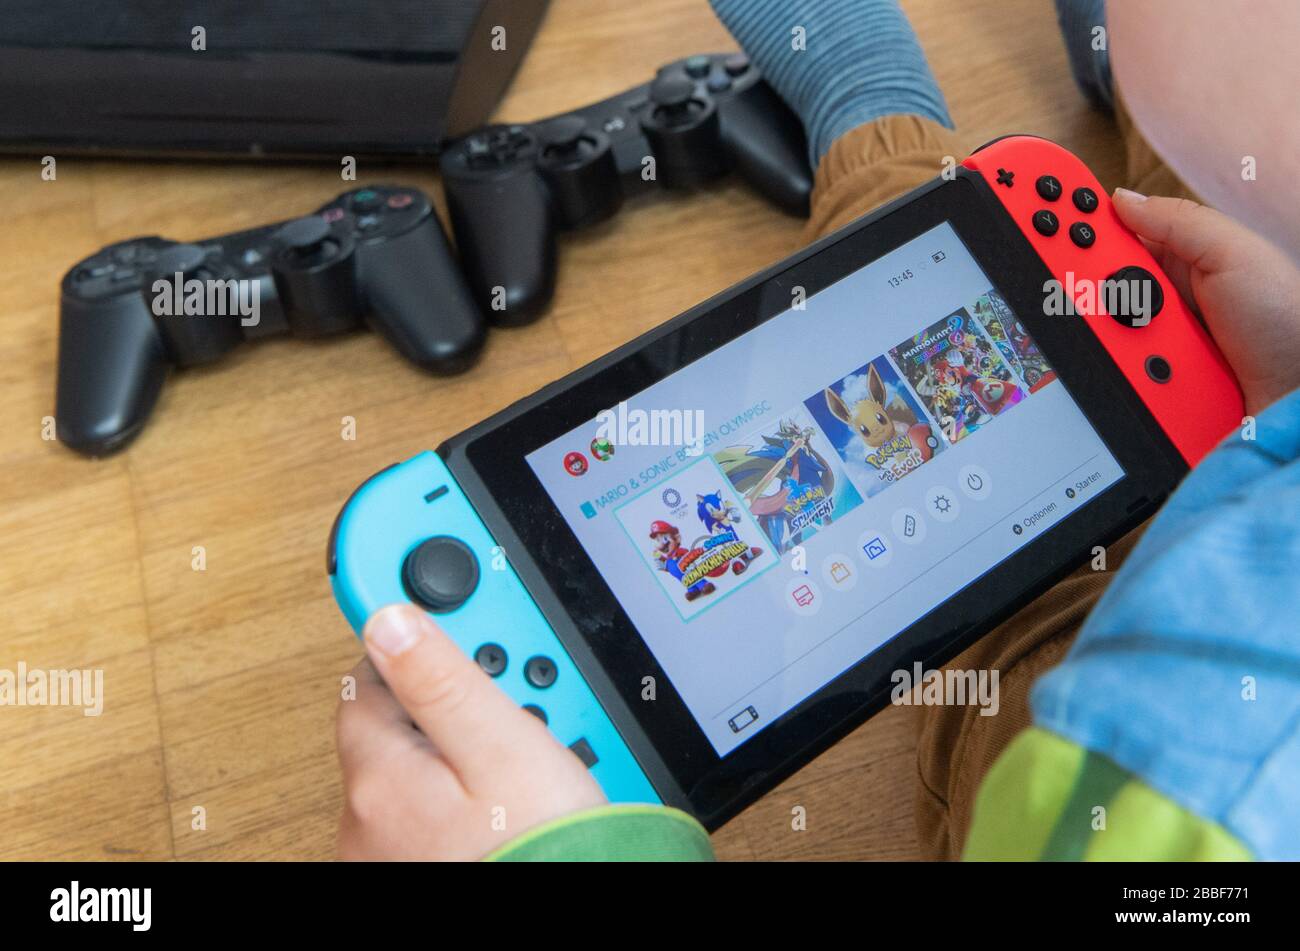 31 March 2020, Lower Saxony, Hanover: ILLUSTRATION - A child is playing with a Nintendo Switch game console while a Sony Playstation 3 with two controllers is seen in the background (scene posed) Because of the contact restrictions in the Corona crisis, criminologist Christian Pfeiffer sees a significantly increased risk of video and computer game addiction among children and adolescents. Photo: Julian Stratenschulte/dpa Stock Photo